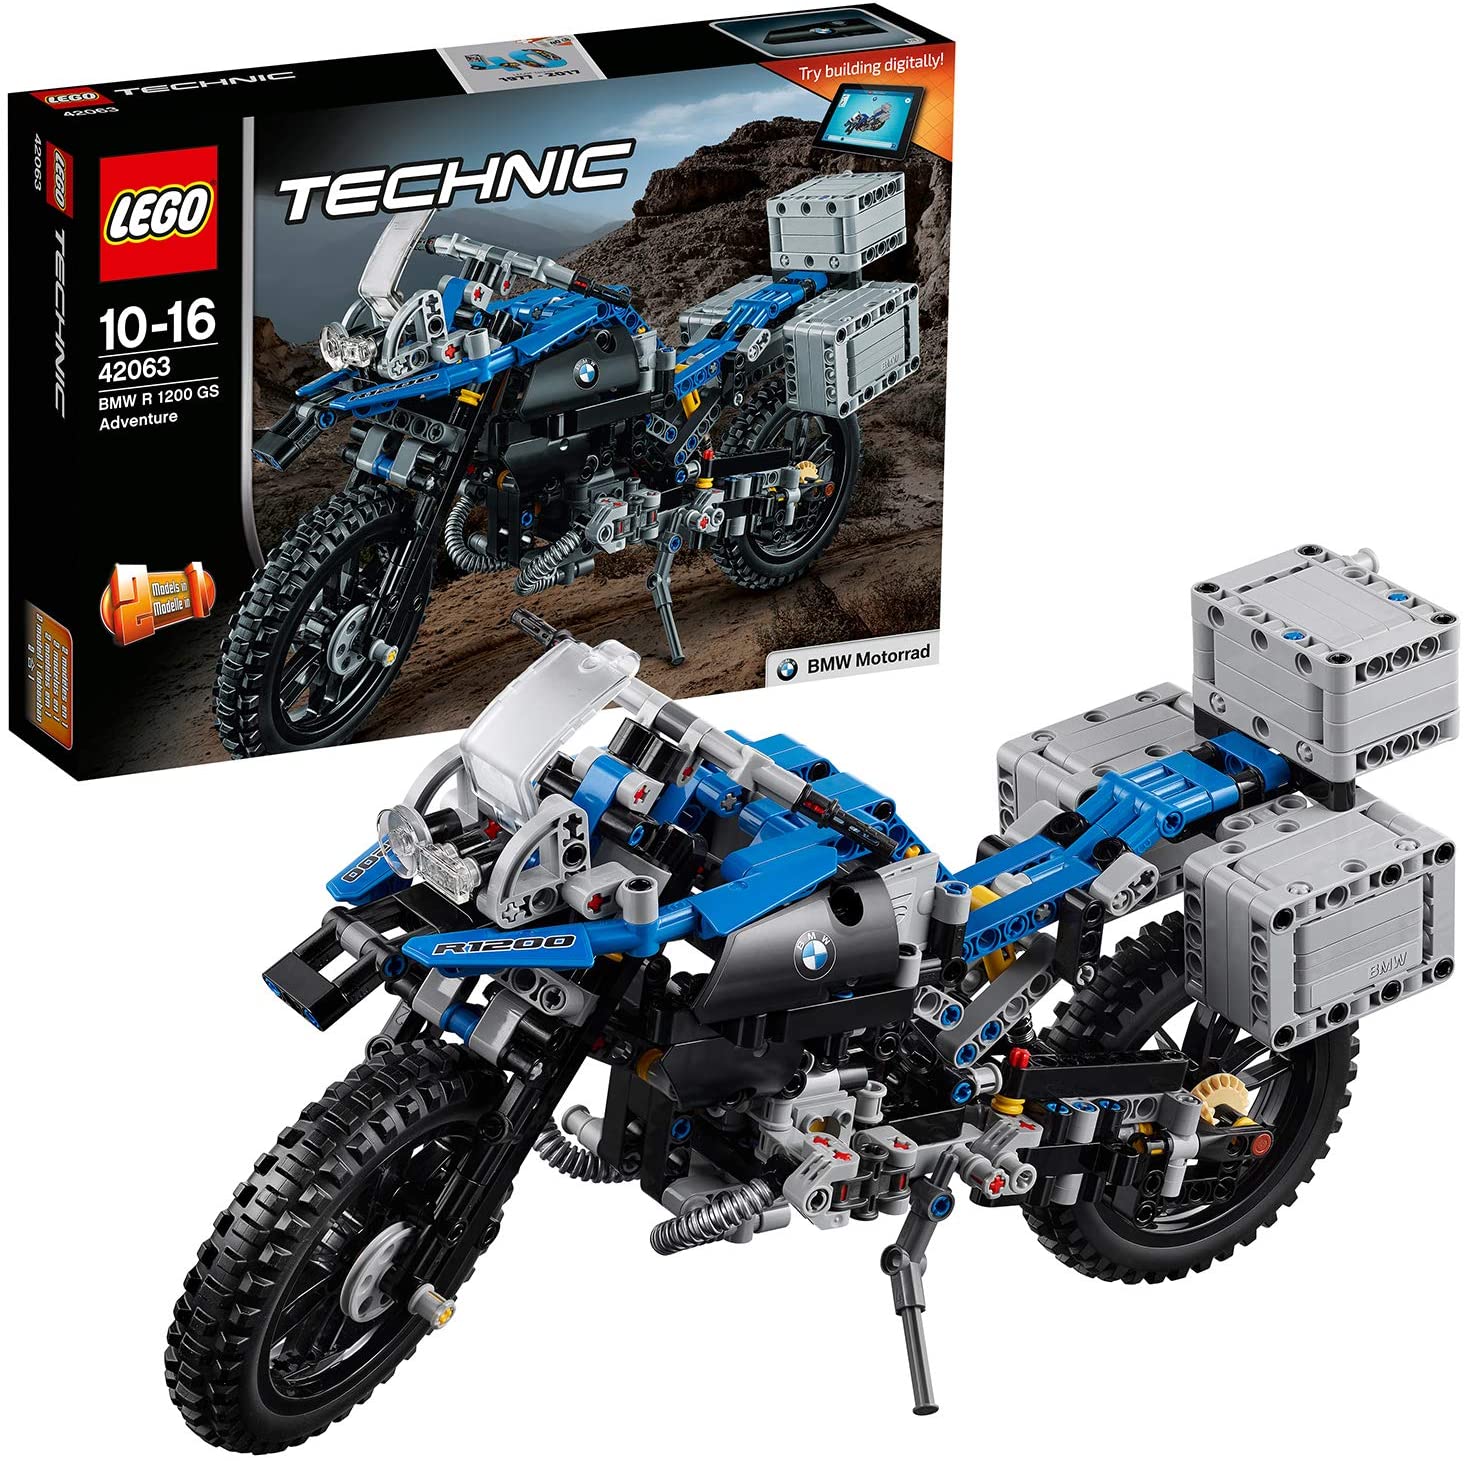 7 Best LEGO Motorcycle Sets 2023 - Buying Guide & Reviews 5